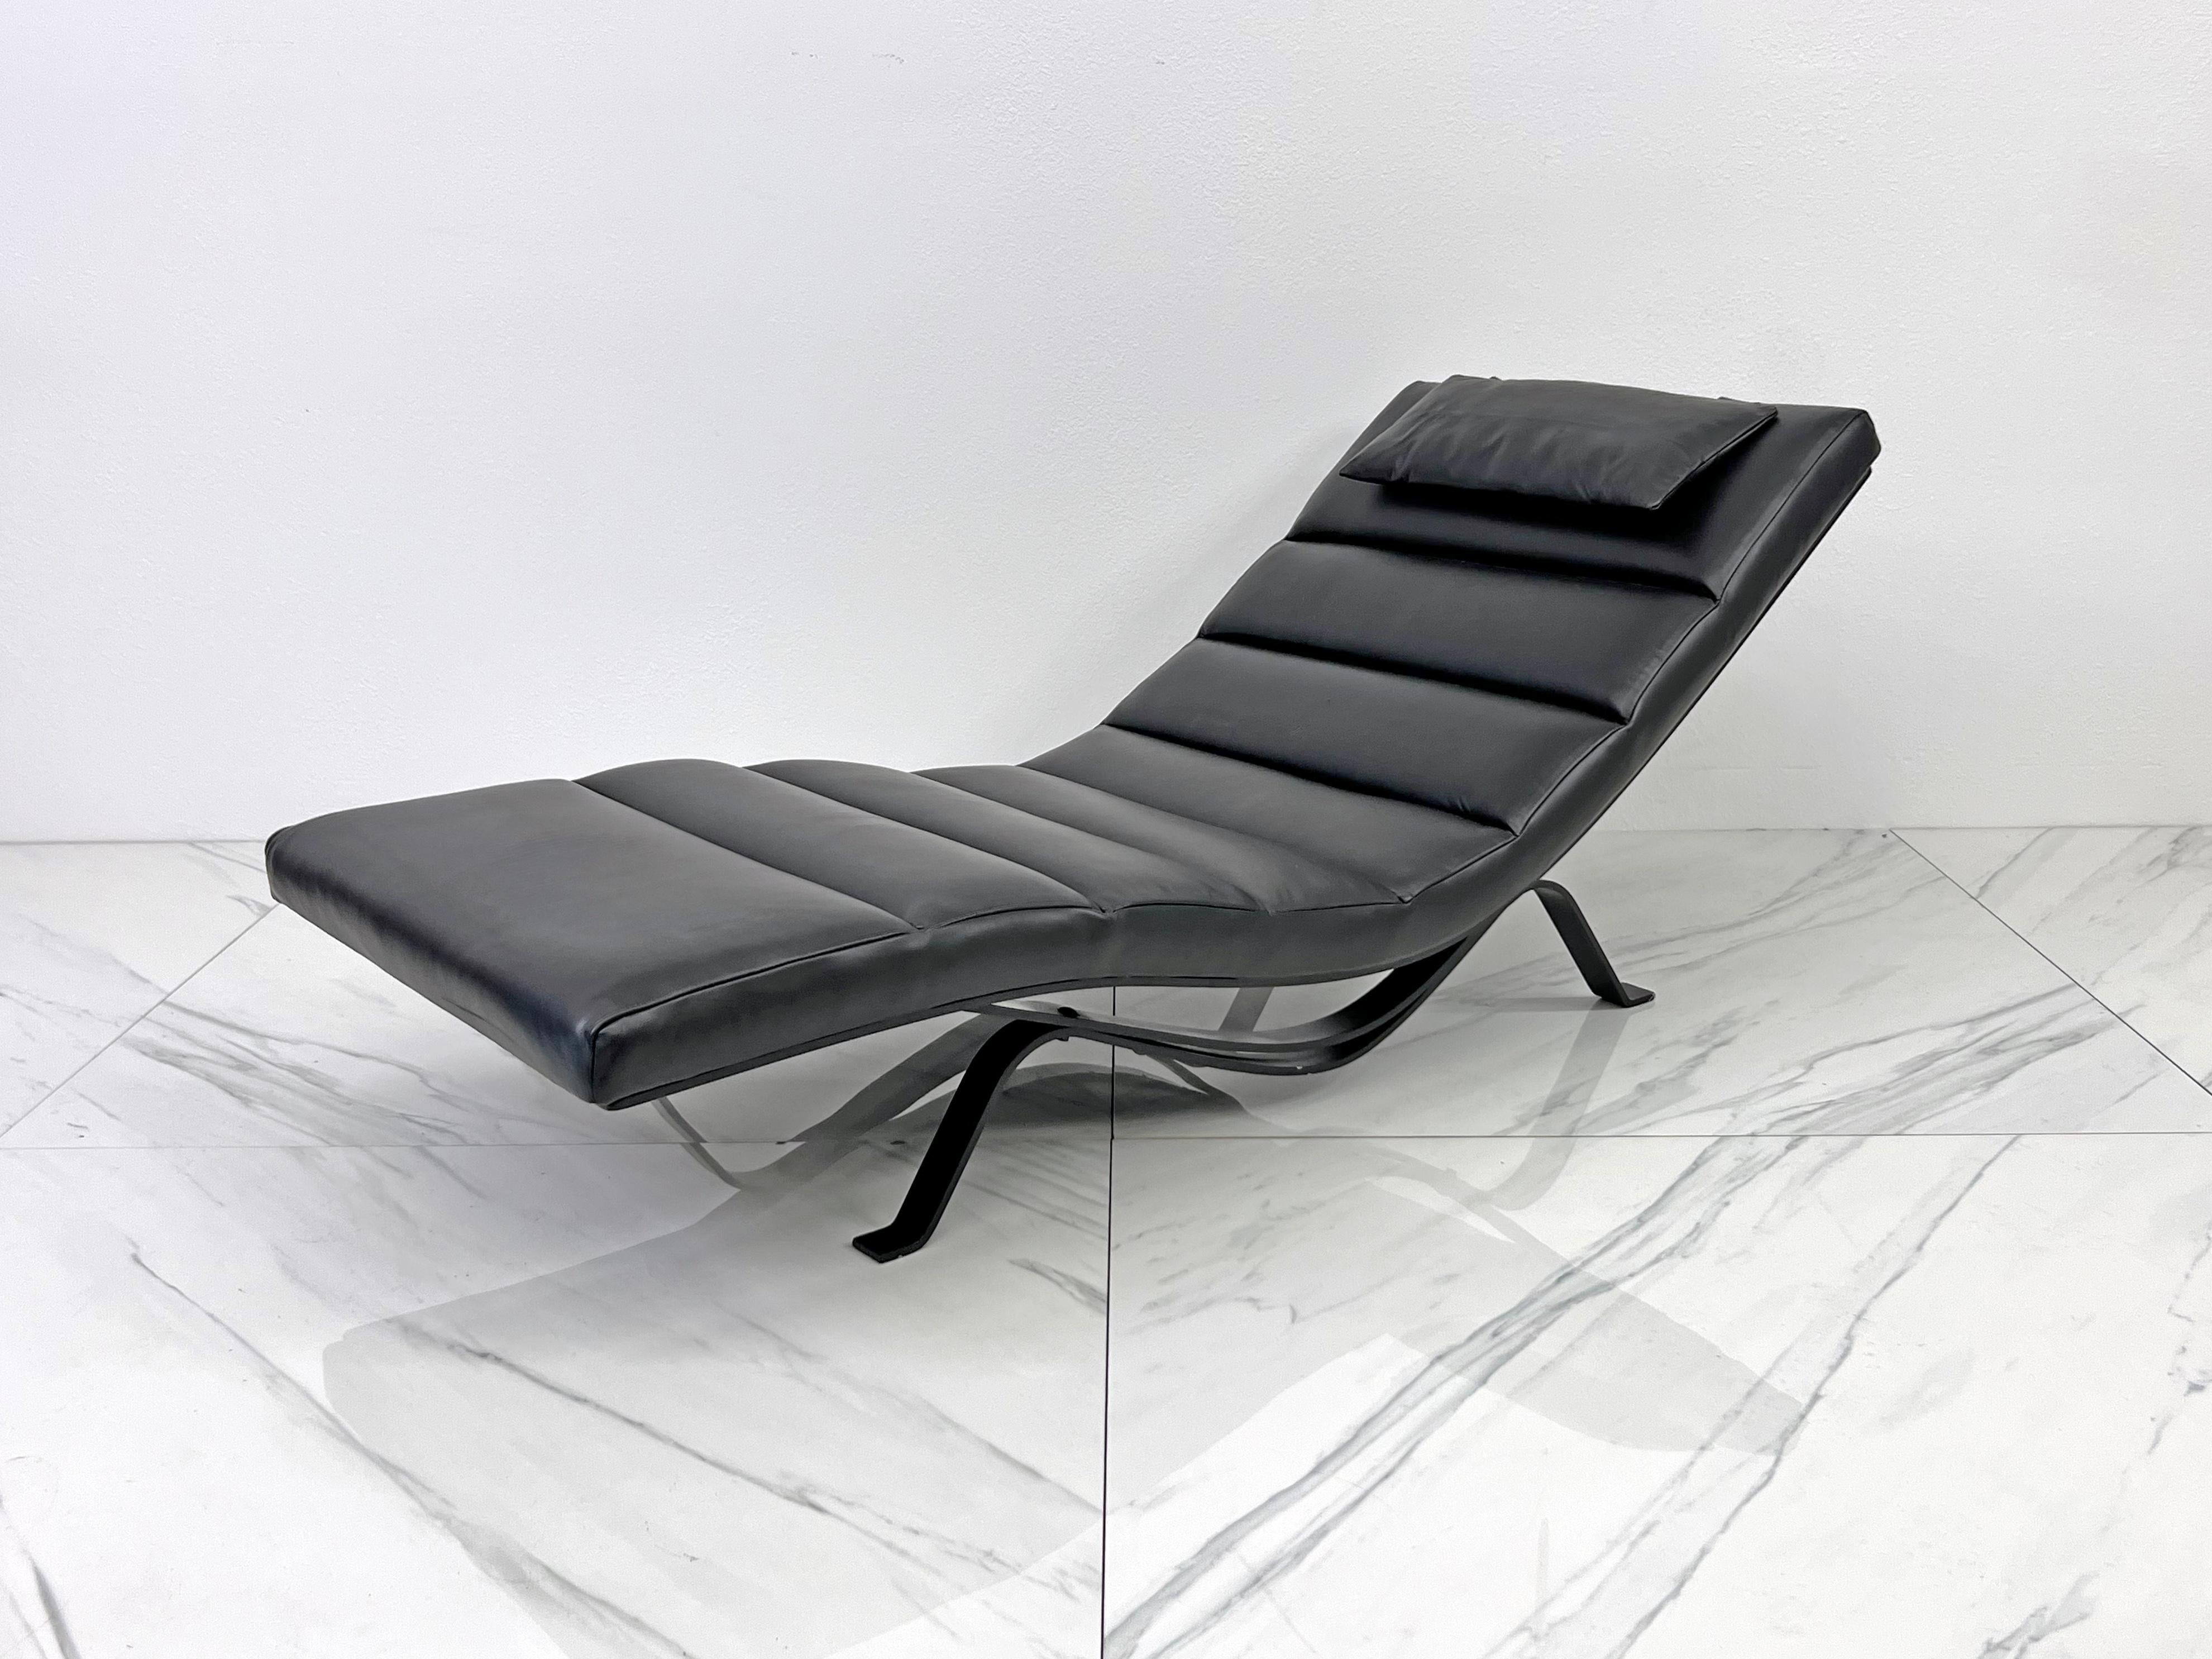 Early Rare Prototype for N° 5490 Chaise Lounge, George Nelson, 1953 For Sale 4